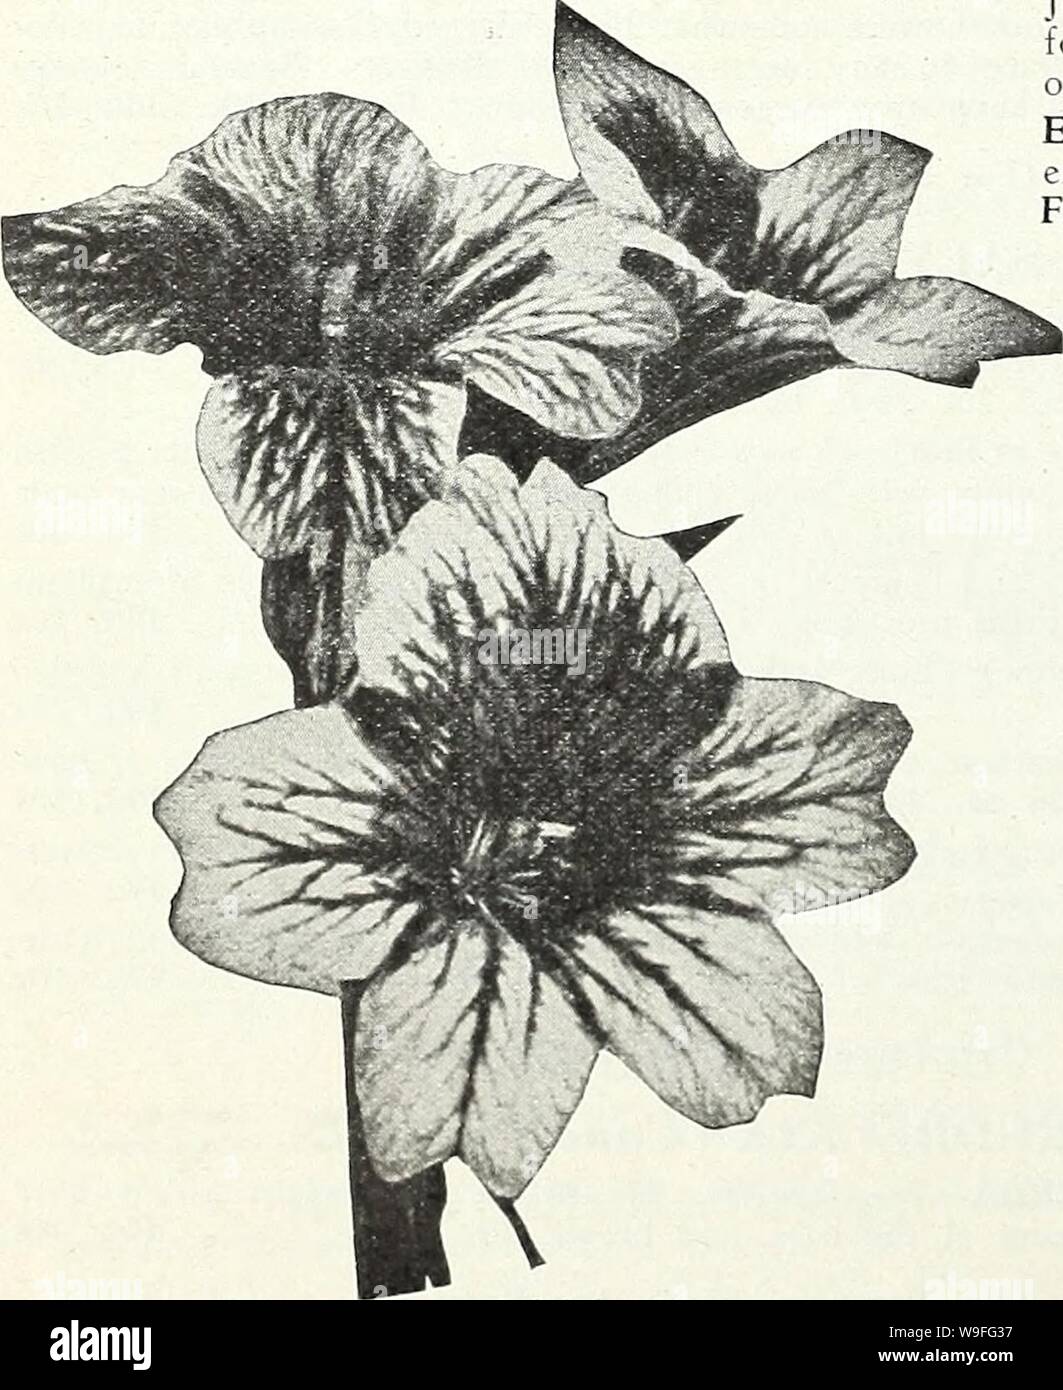 Archive image from page 39 of Currie Bros  fifty-eighth year. Currie Bros. : fifty-eighth year 1933  curriebrosfiftye19curr Year: 1933 ( Scabiosa (Azure Fairy) SILENE (Catchfly) PENDULA COMPACTA—Dwarf, hardy annual, bearing pretty, pink flowers freely; 6 inches. Pkt. 10c (For Perennial Seeds, See Page 53)    SalpiglossU SCABIOSA (Mourning Bride) Excellent border plants, producing an abundance of long stemmed, double flowers in many colors. Splendid for cutting. LARGE FLOWERING ANNUAL SCABIOSA U oz. Pkt. Azure Fairy—Lavender 30c 10c Cherry Red—Rich cherry red 30c 10c Dark Purple—Velvety black p Stock Photo